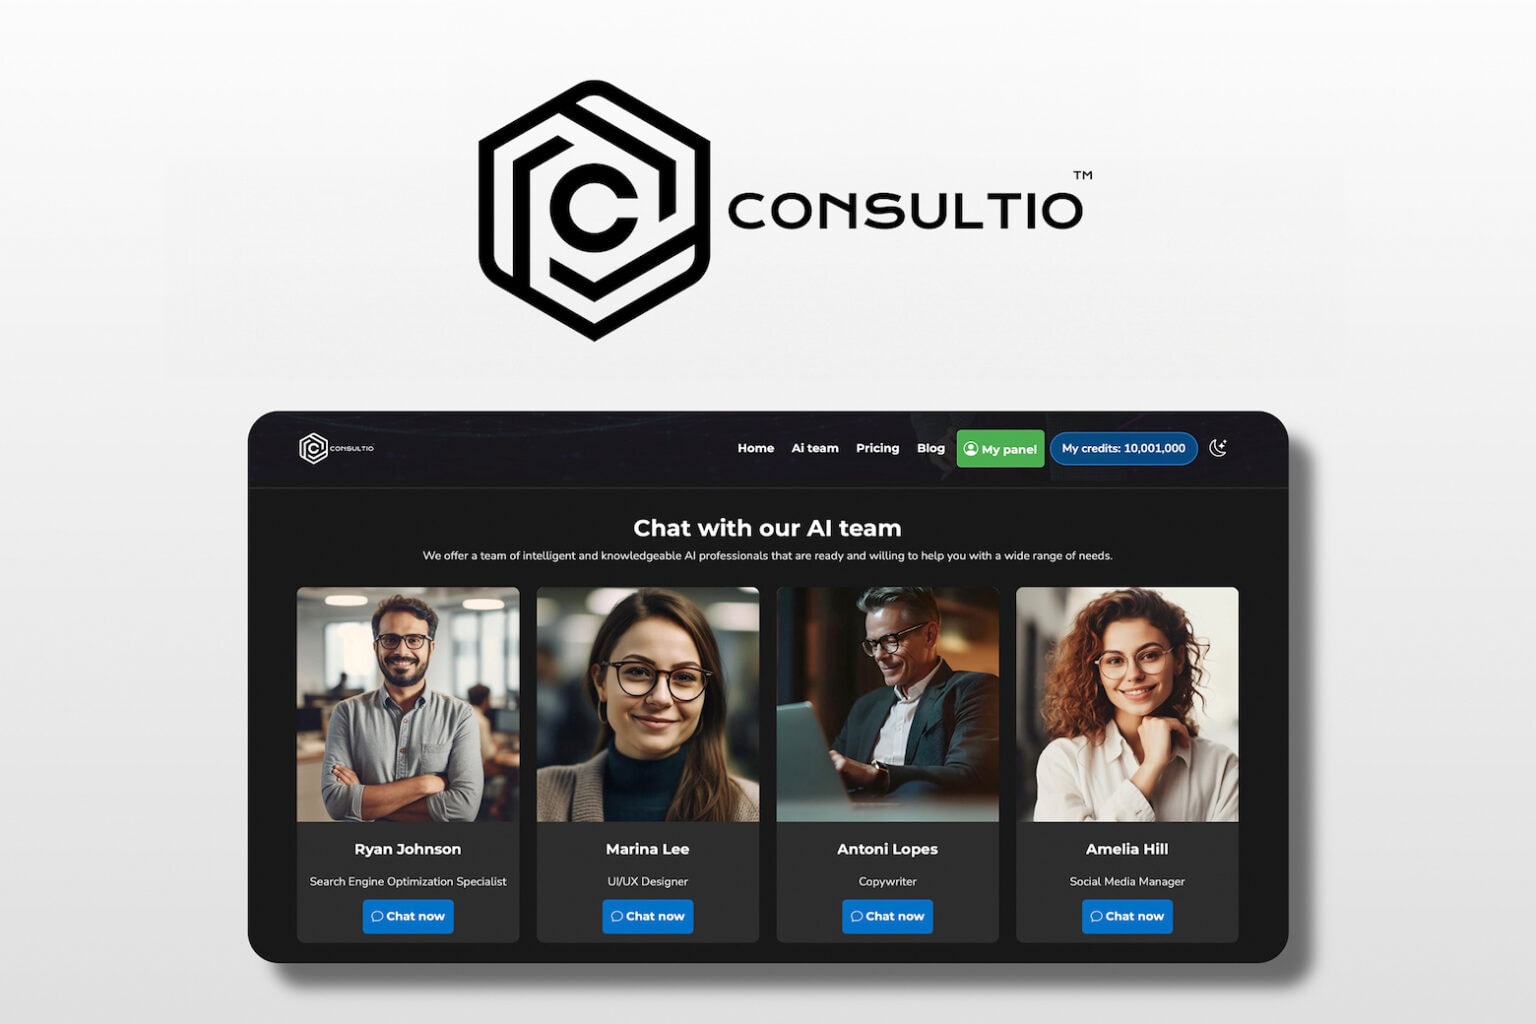 Get knowledge from AI-powered consultants to help your business thrive with Consultio Pro, now $30.